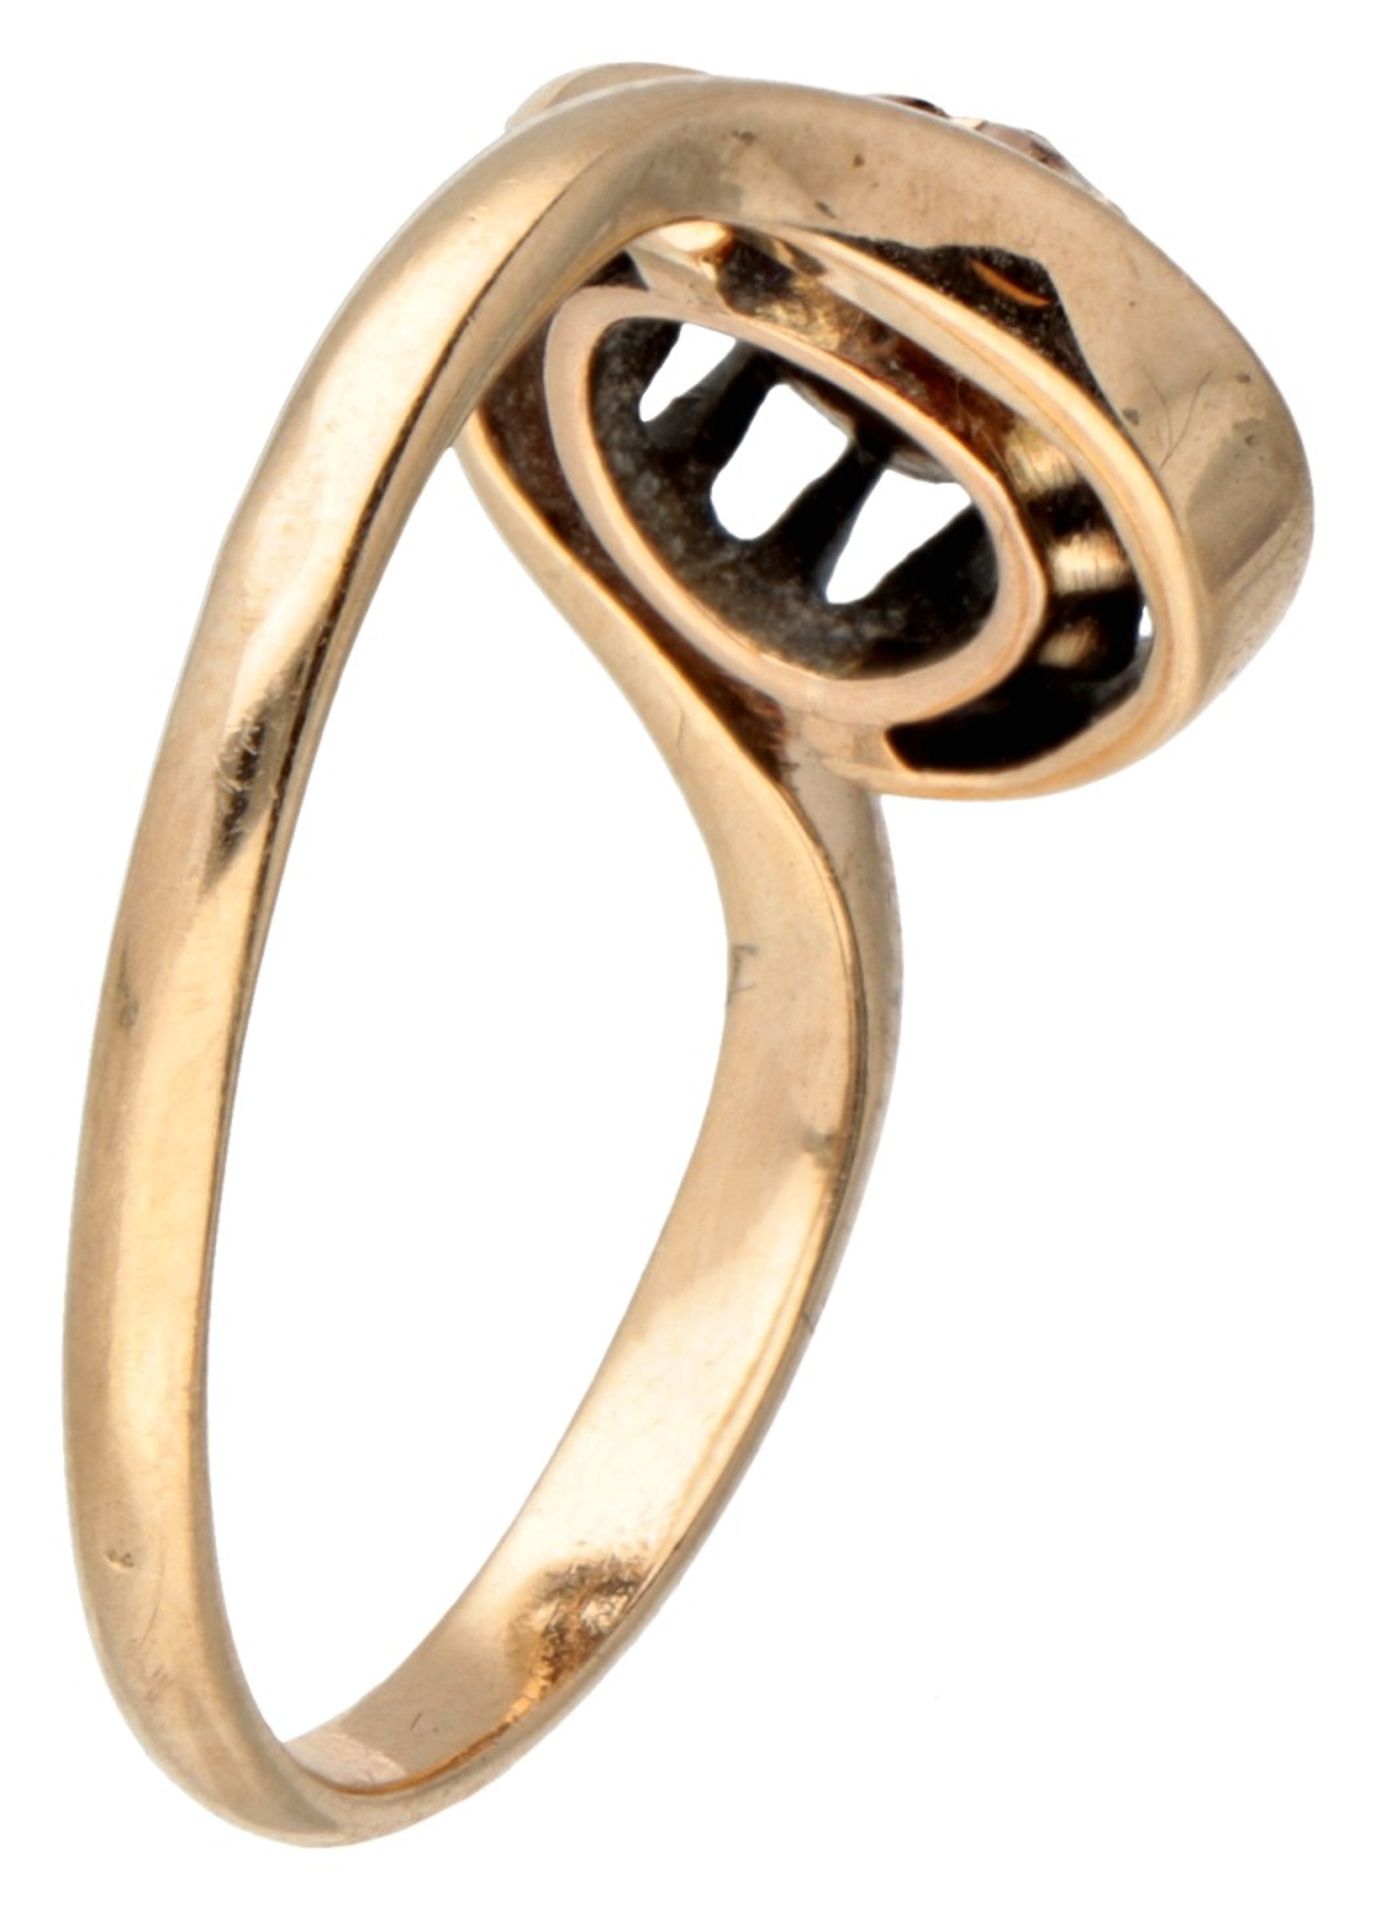 Antique 14K. rose gold ring set with a rose cut diamond. - Image 2 of 2